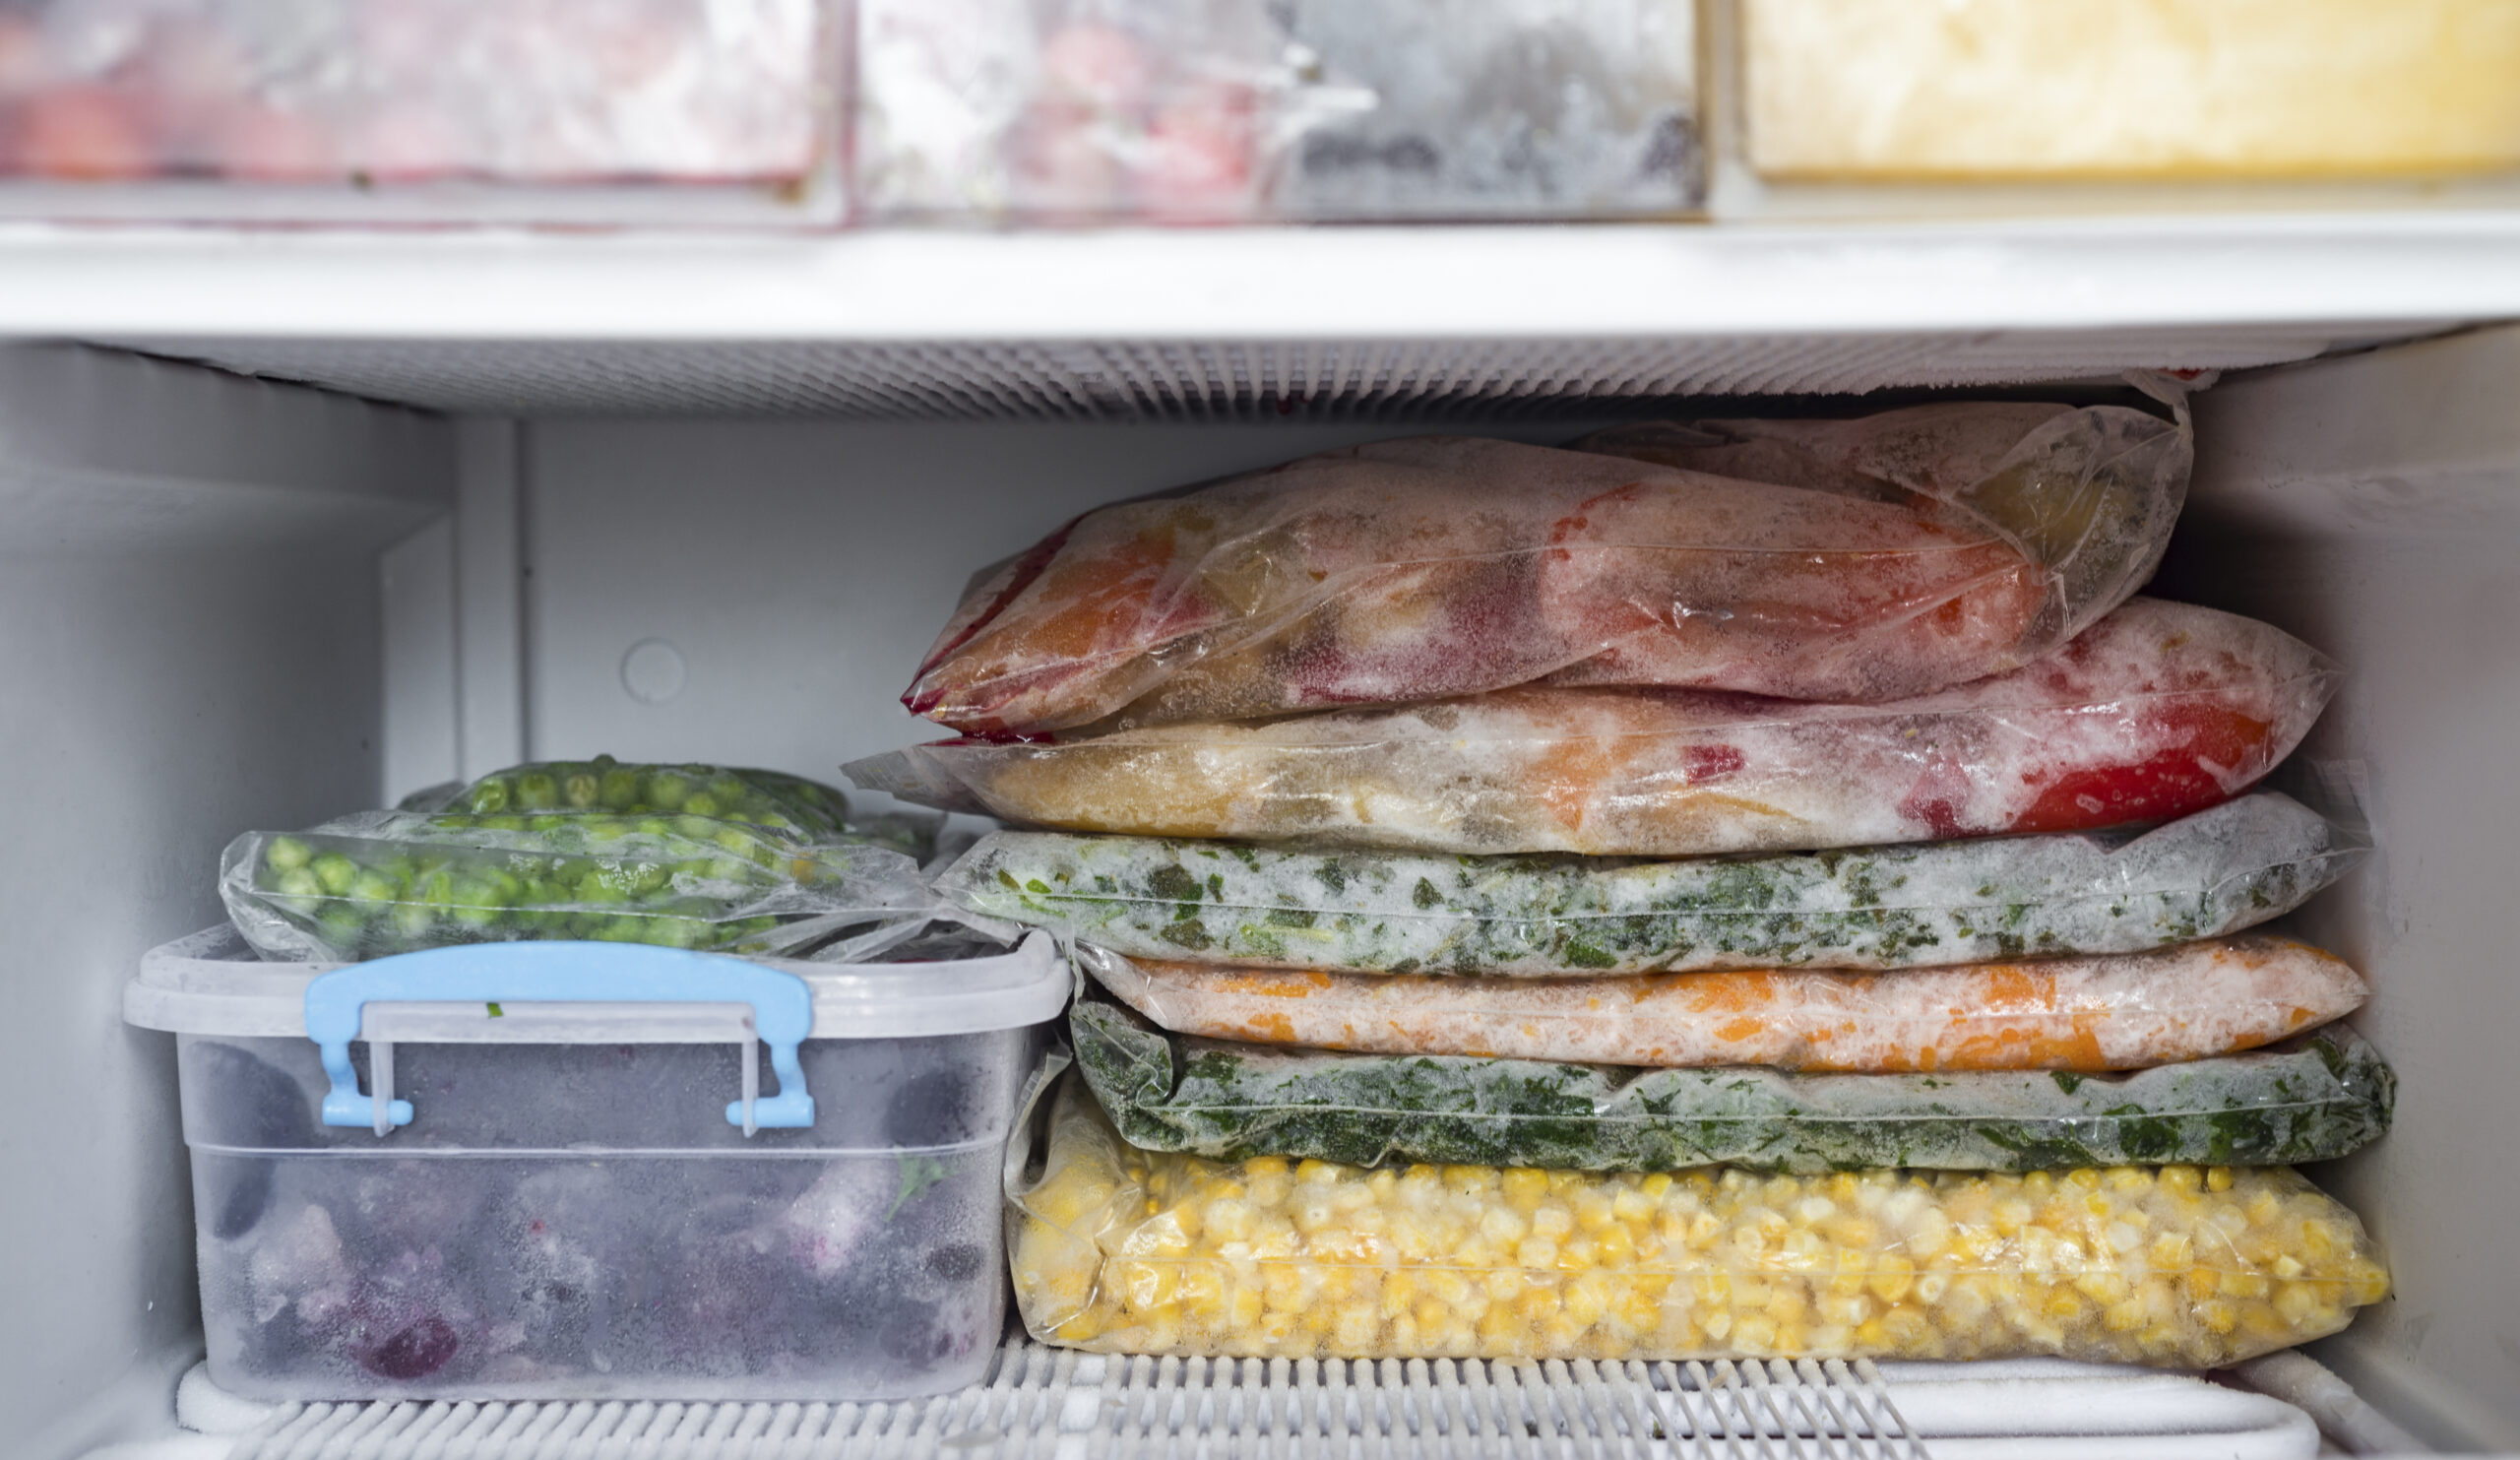 Your Freezer Broke: What To Do With The Food Inside?